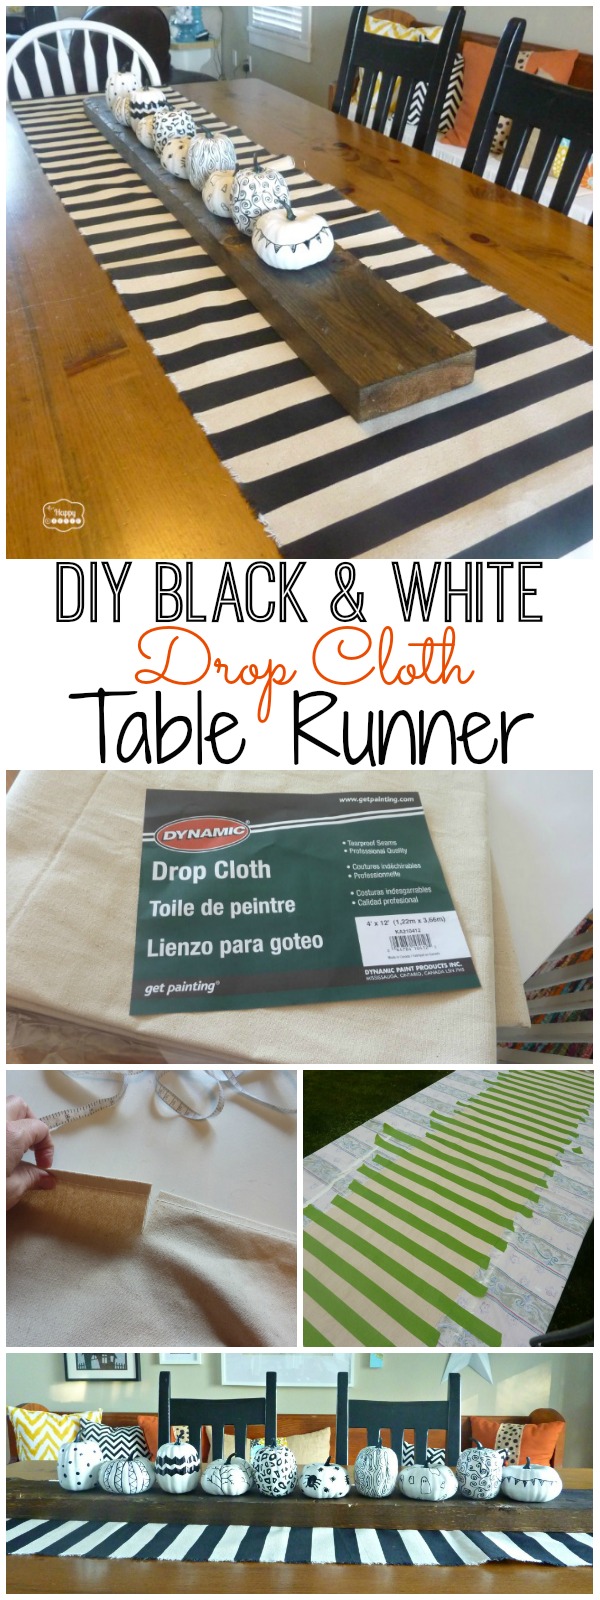 How to make a versatile black and white table runner out of a drop cloth at The Happy Housie